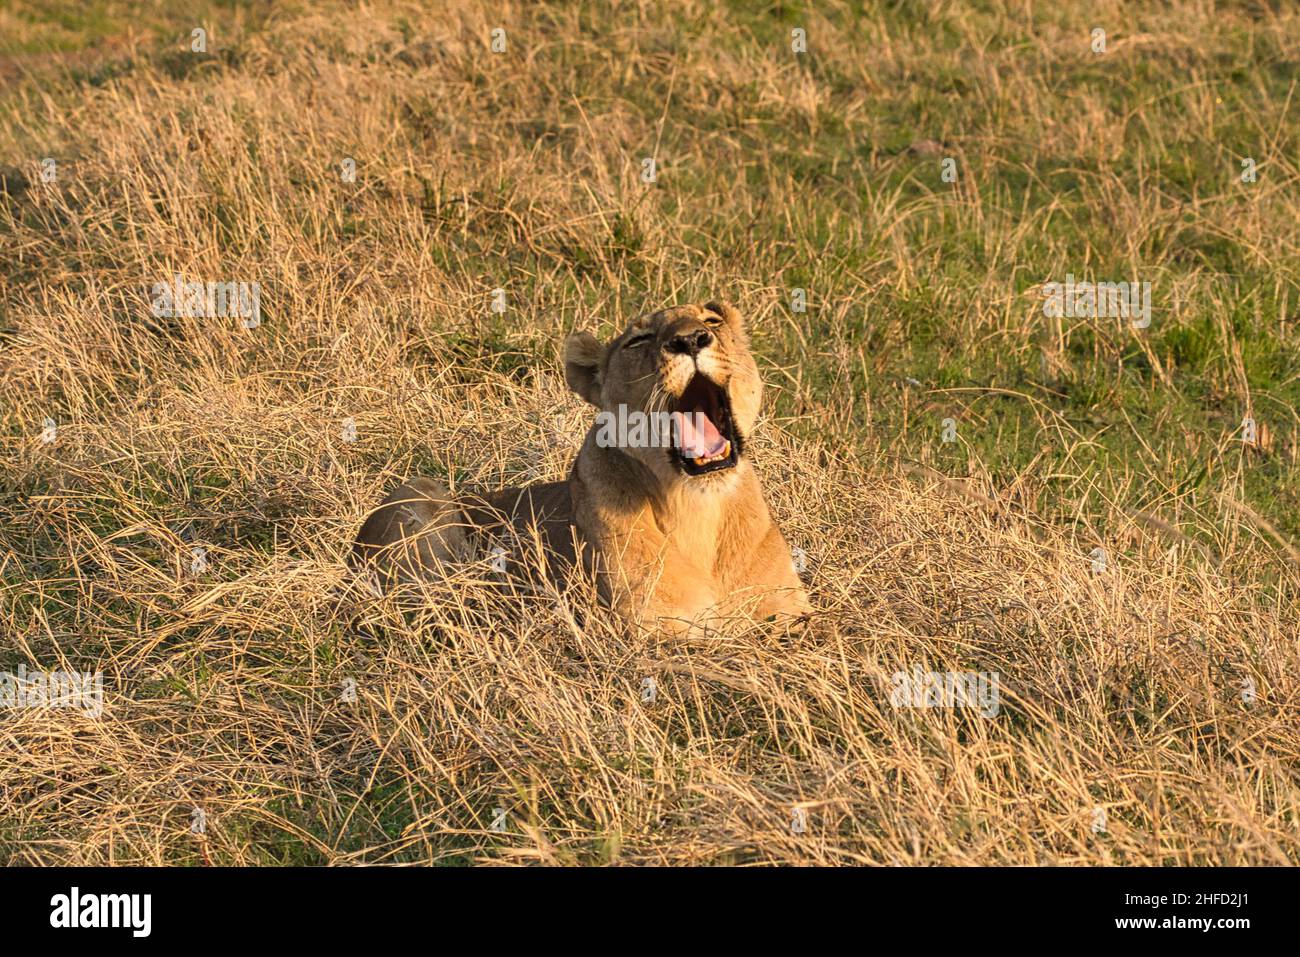 Lion, Panthera leo, lying in grass with open mouth. Stock Photo